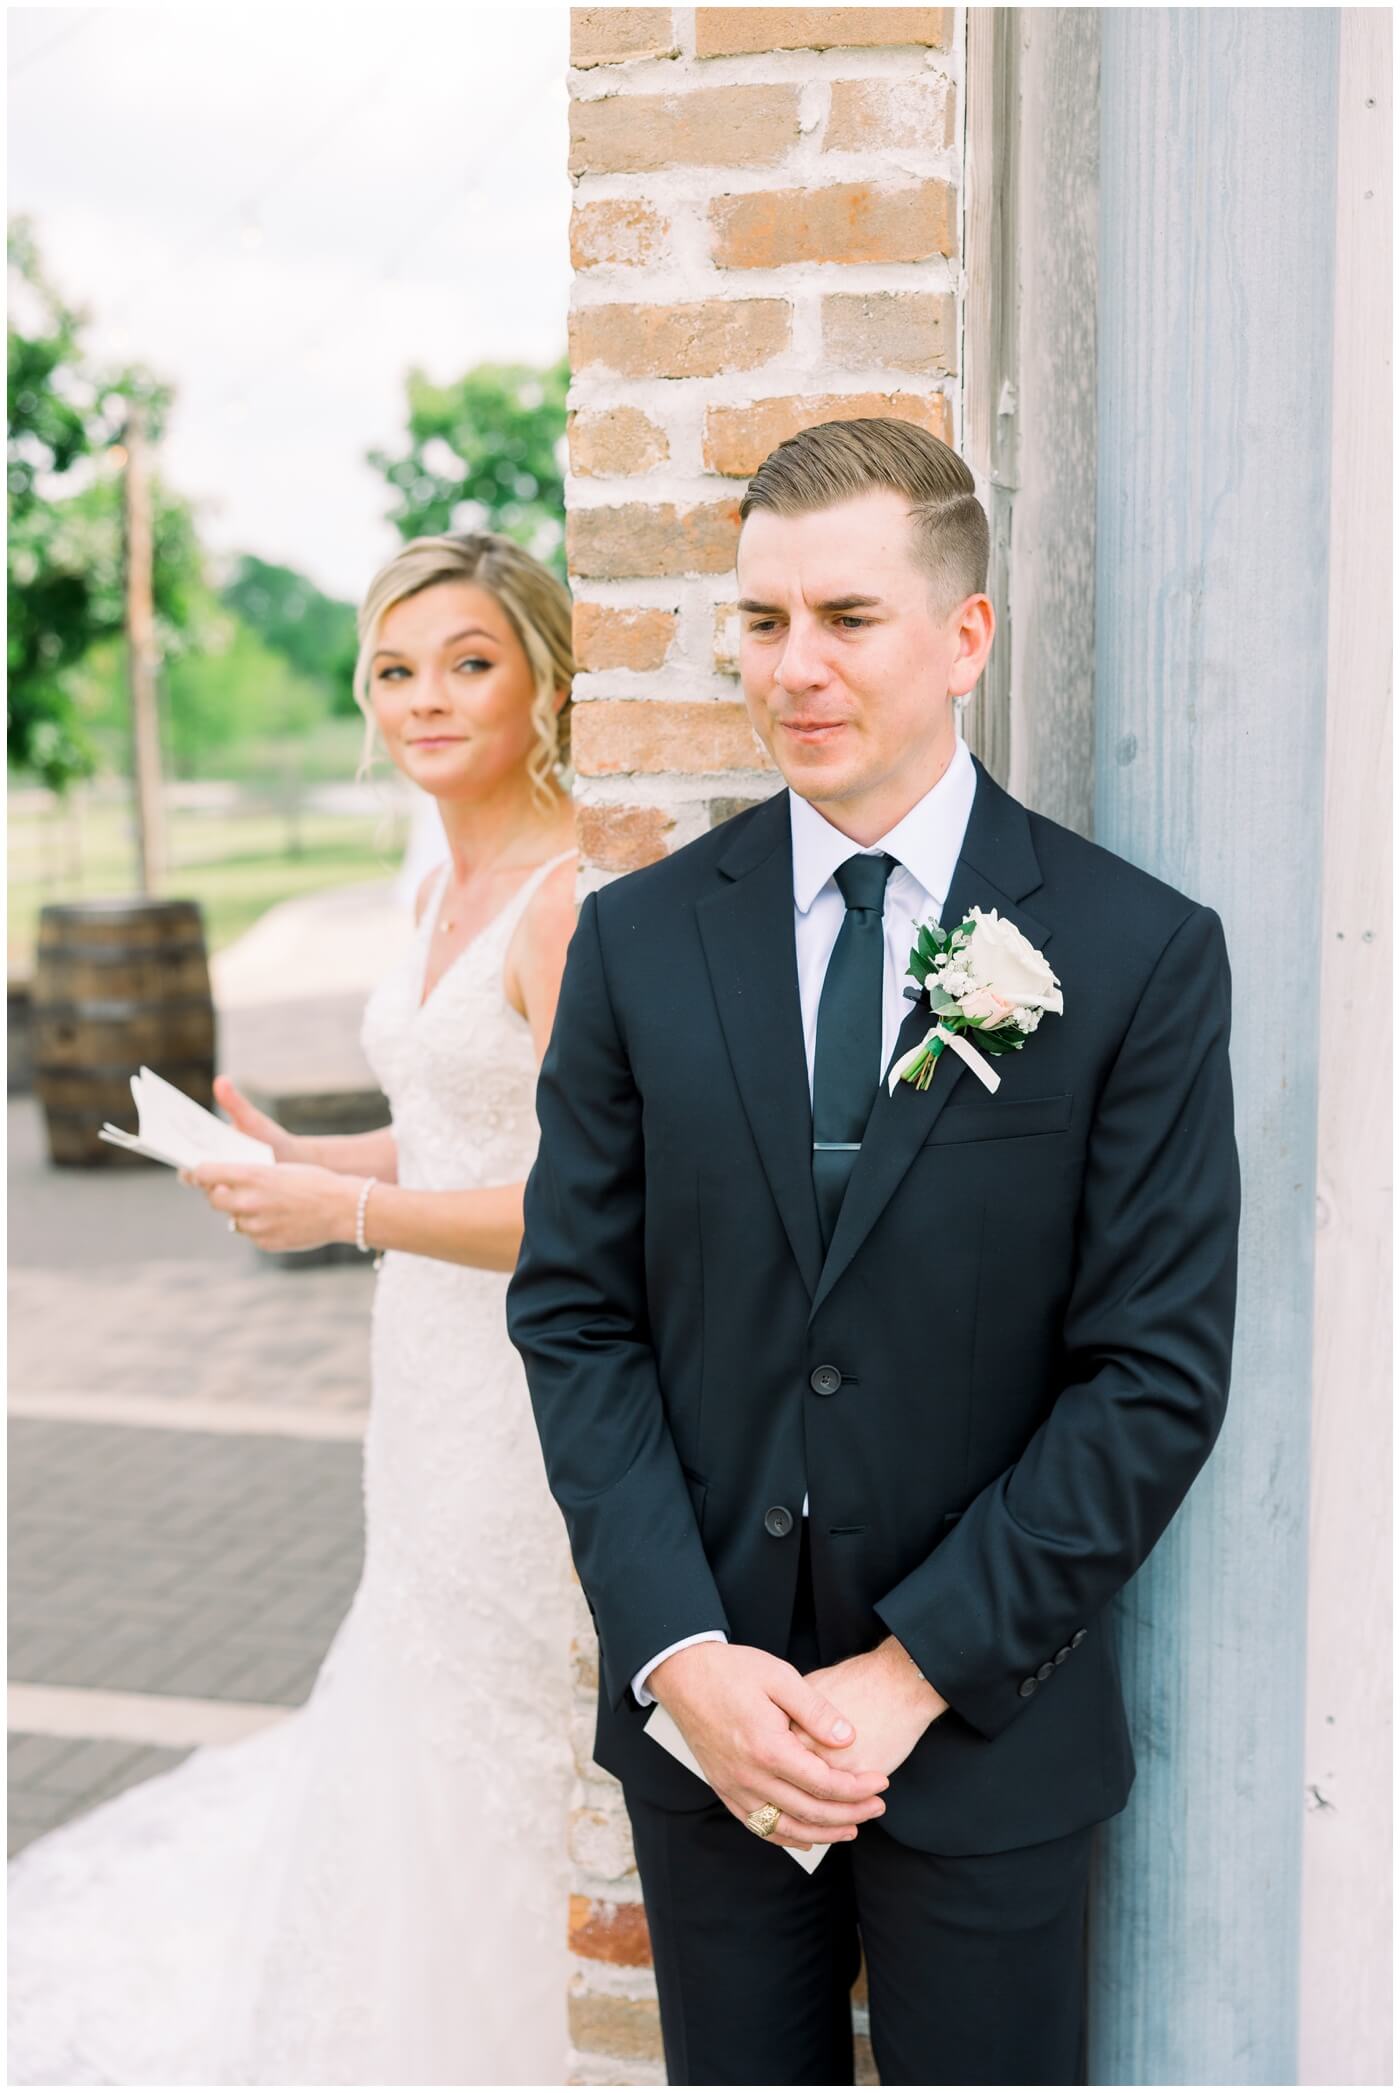 Beckendorff Farms | An emotional bride and groom as they share a first touch